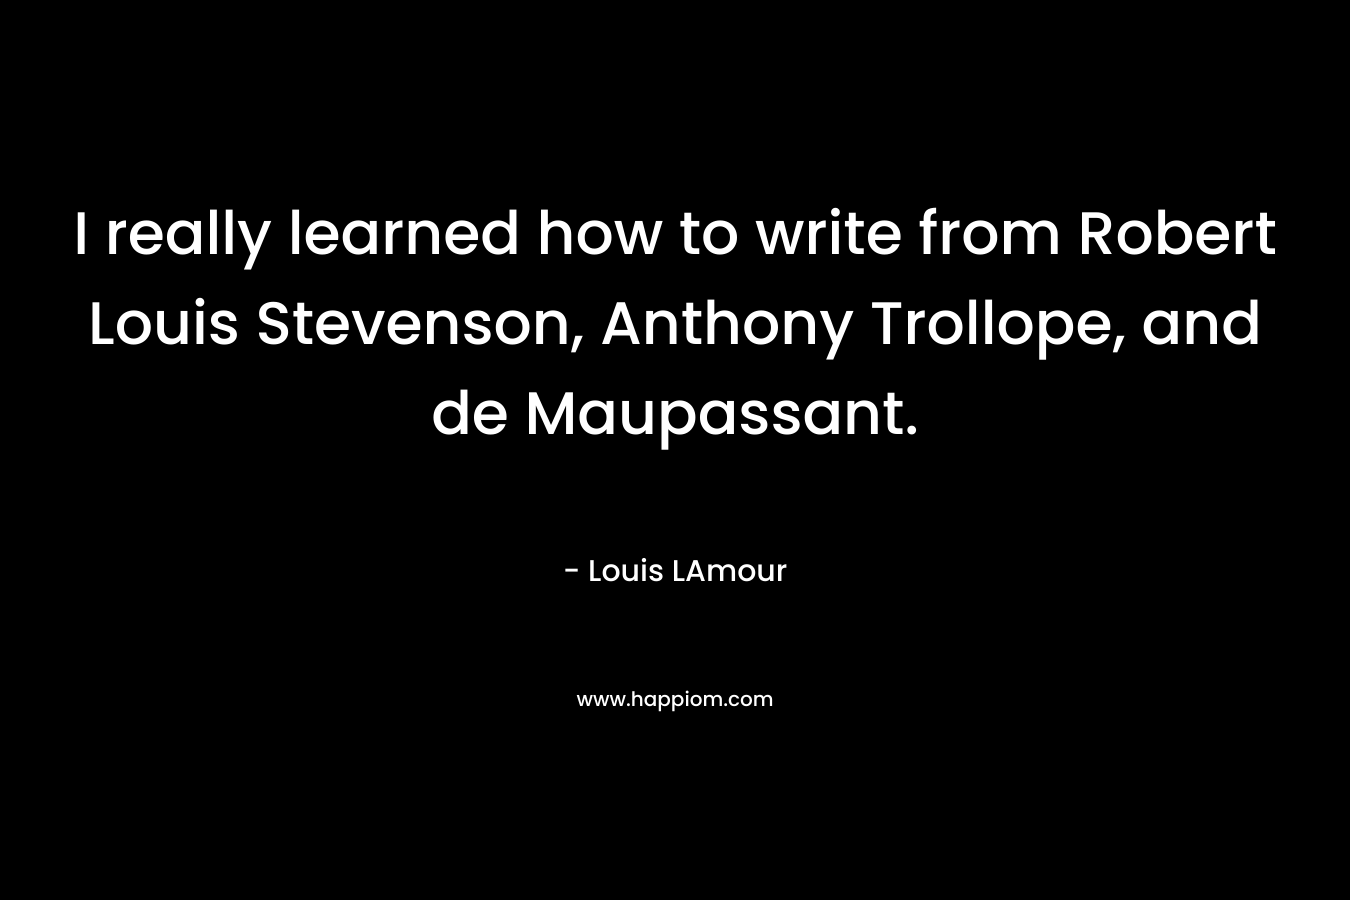 I really learned how to write from Robert Louis Stevenson, Anthony Trollope, and de Maupassant. – Louis LAmour